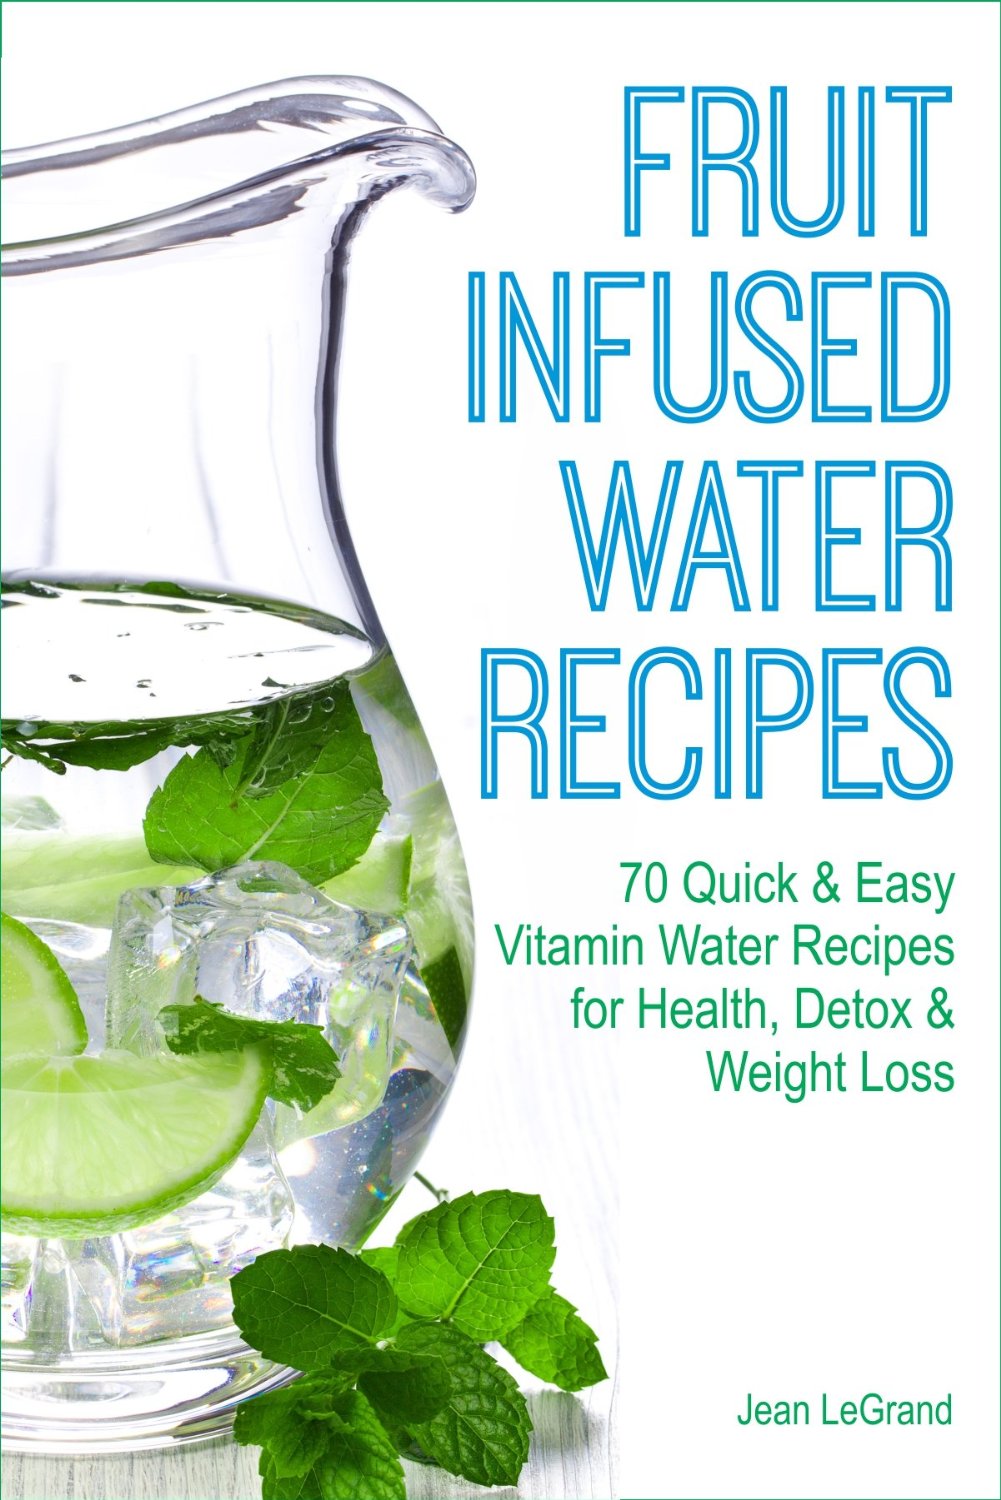 Fruit Infused Water Recipes by Jean LeGrand